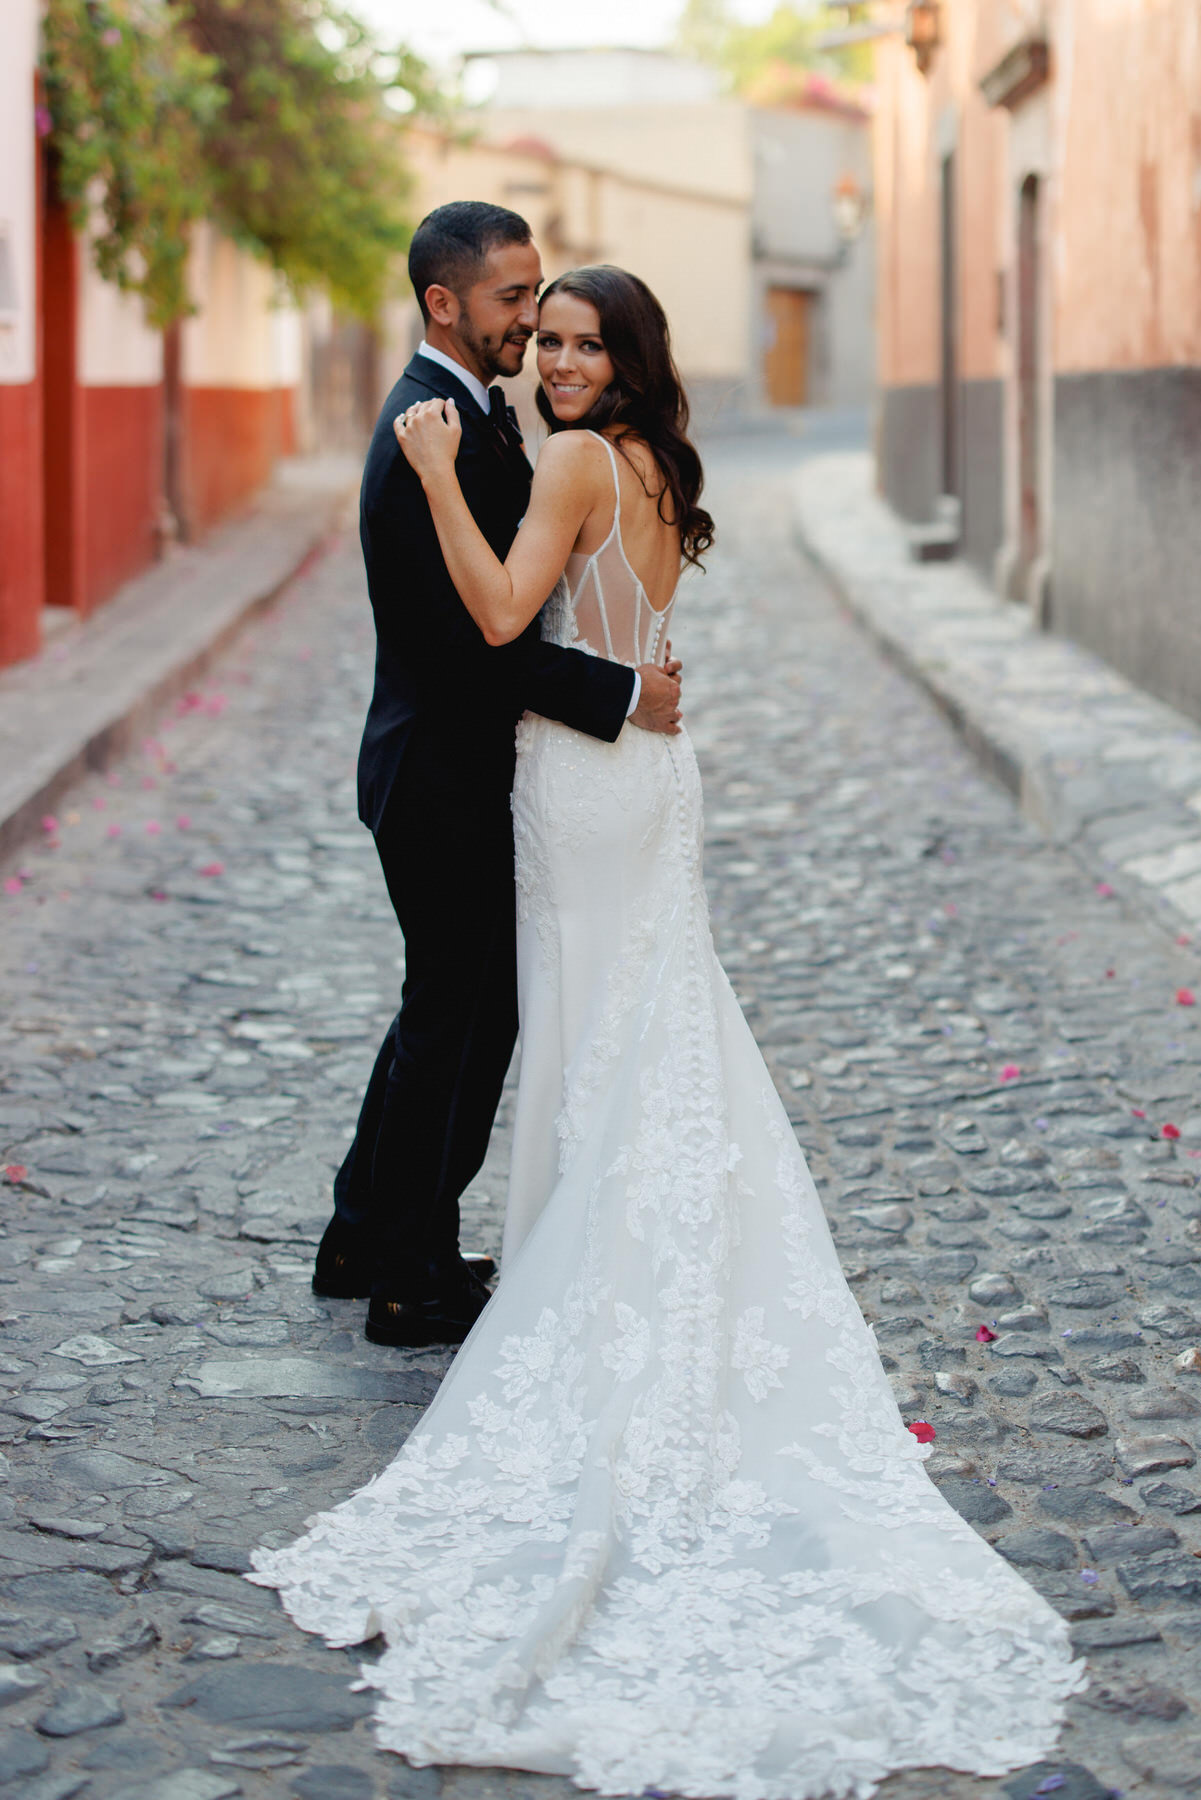 Wedding inspiration in Mexico